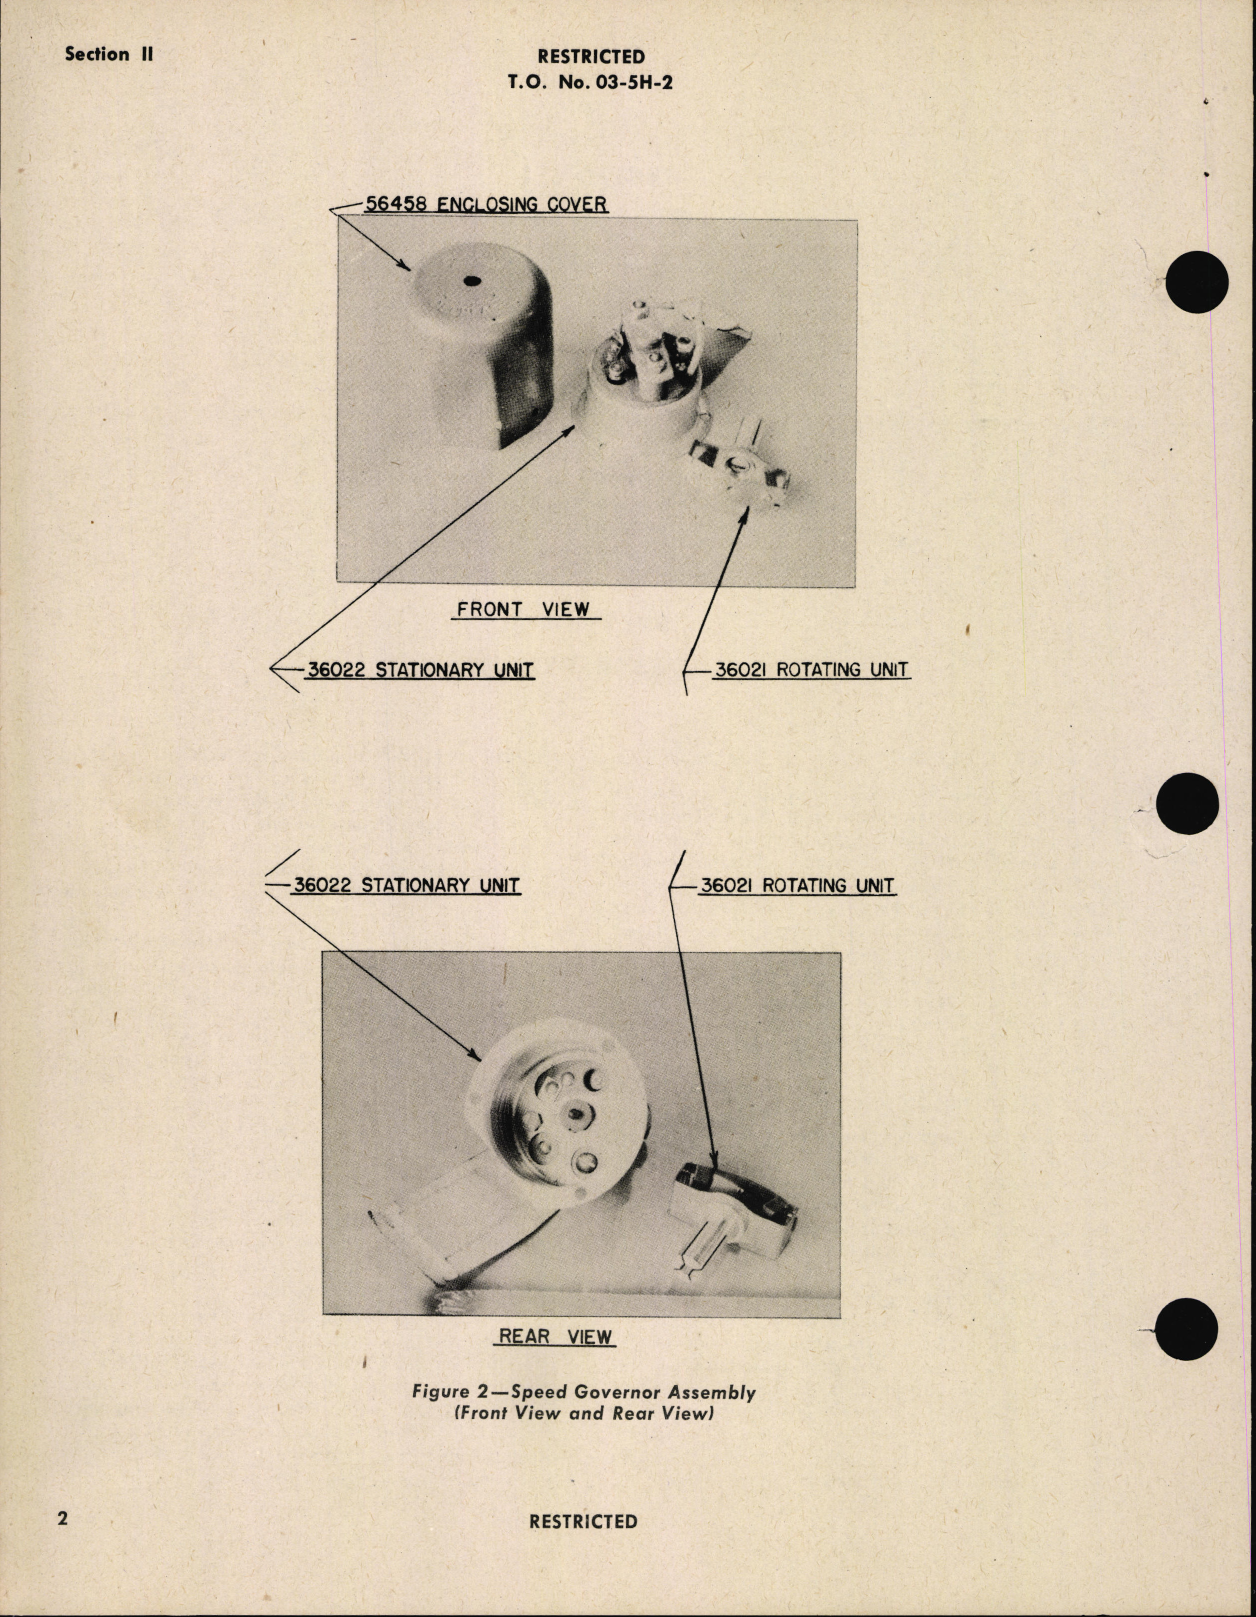 Sample page 6 from AirCorps Library document: Handbook of Instructions with Parts Catalog for Inverter Type MG-149